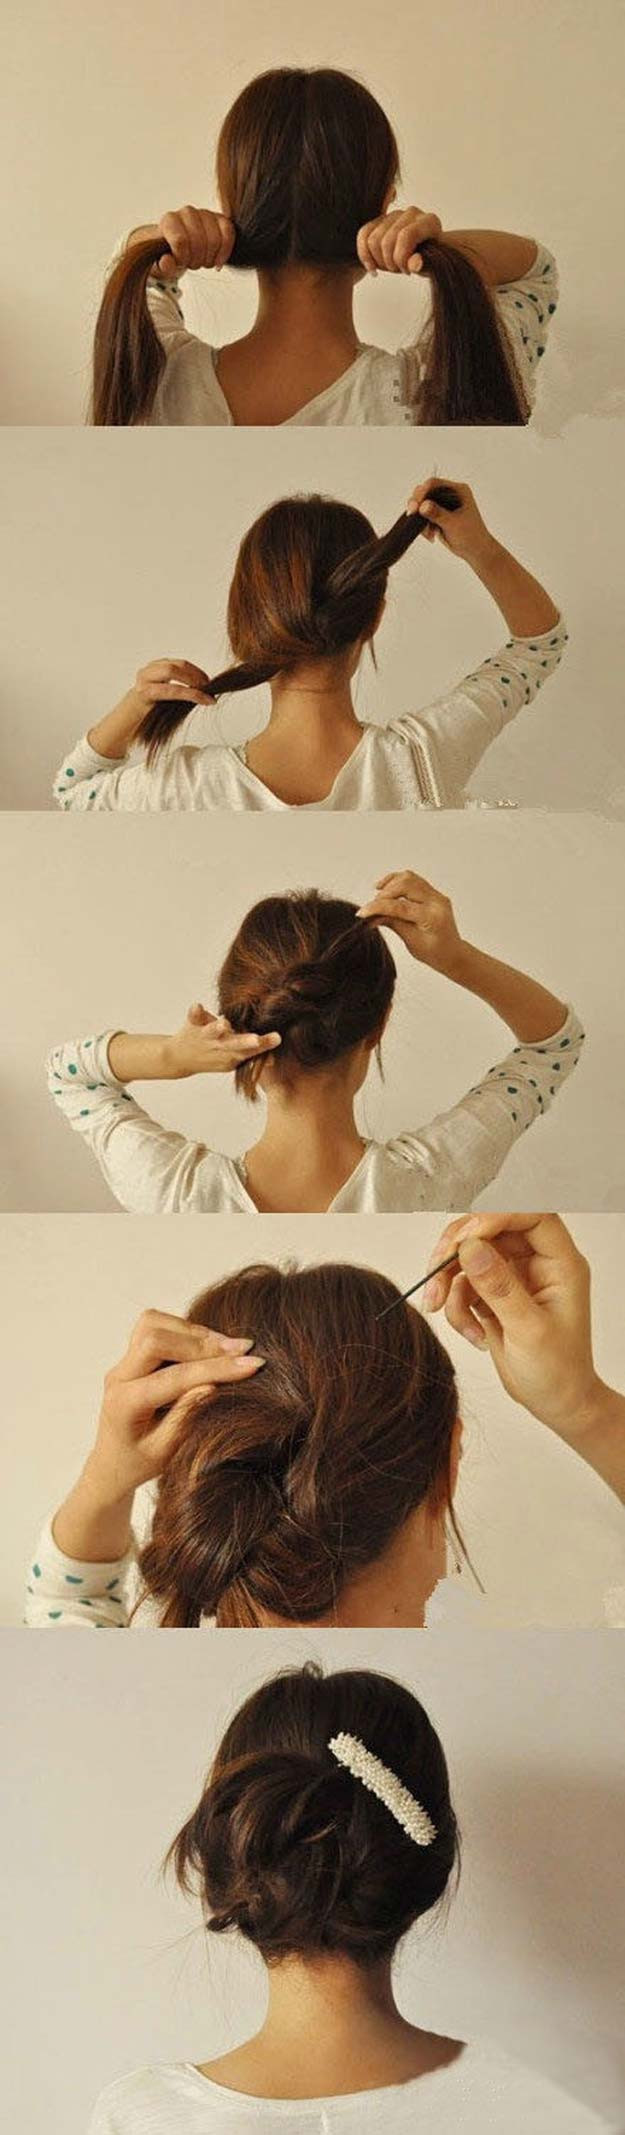 DIY Long Hairstyles
 36 Best Hairstyles for Long Hair DIY Projects for Teens